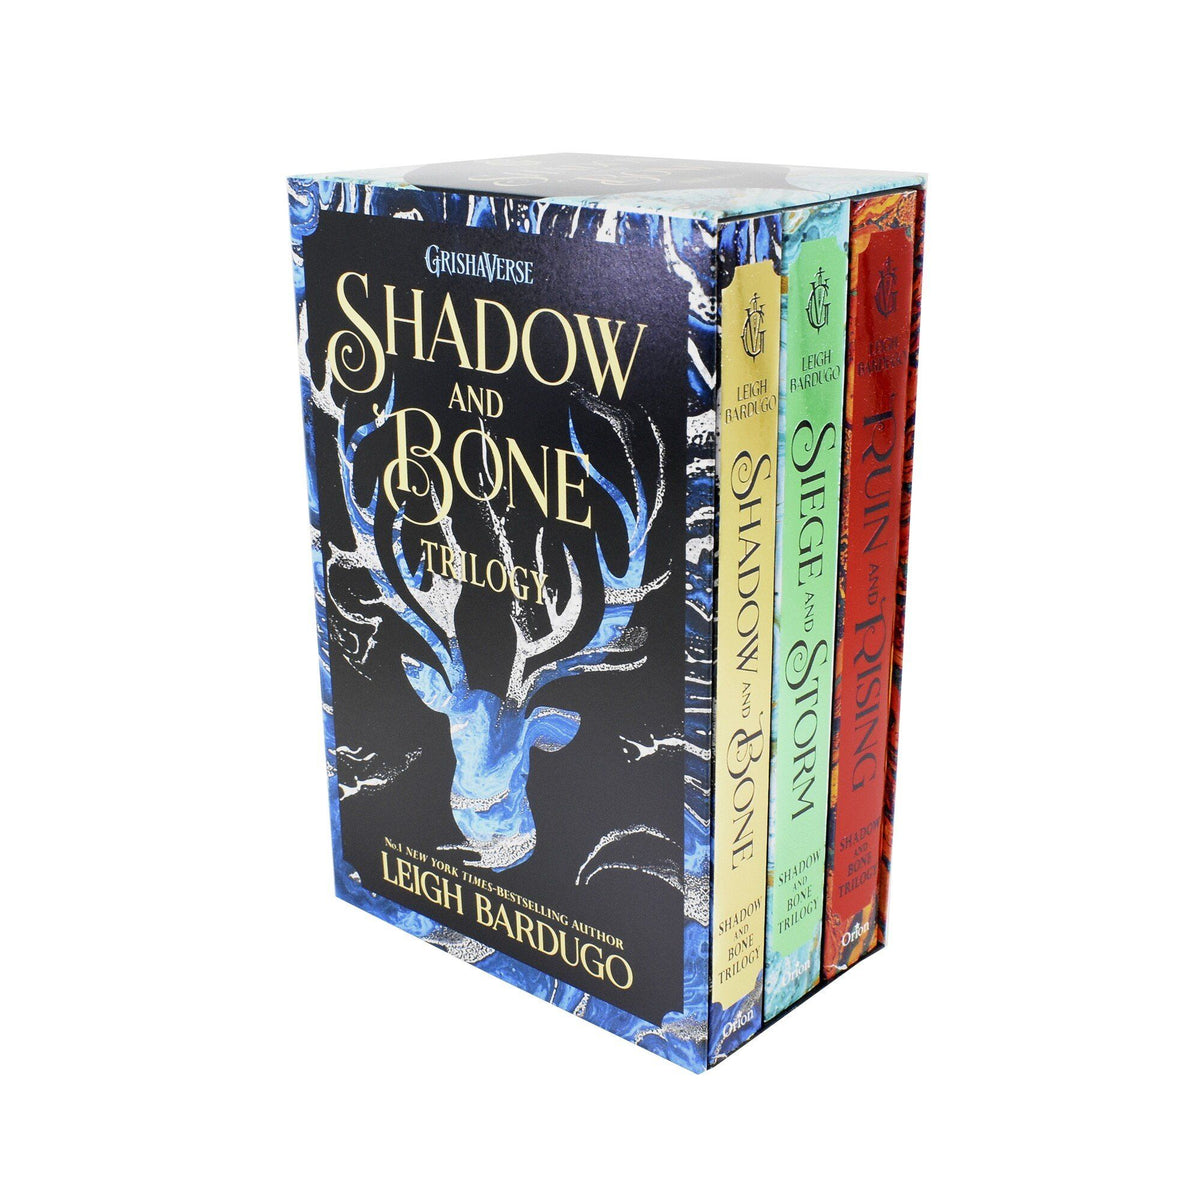 Siege and Storm (Shadow and Bone Trilogy #2) by Leigh Bardugo, Paperback